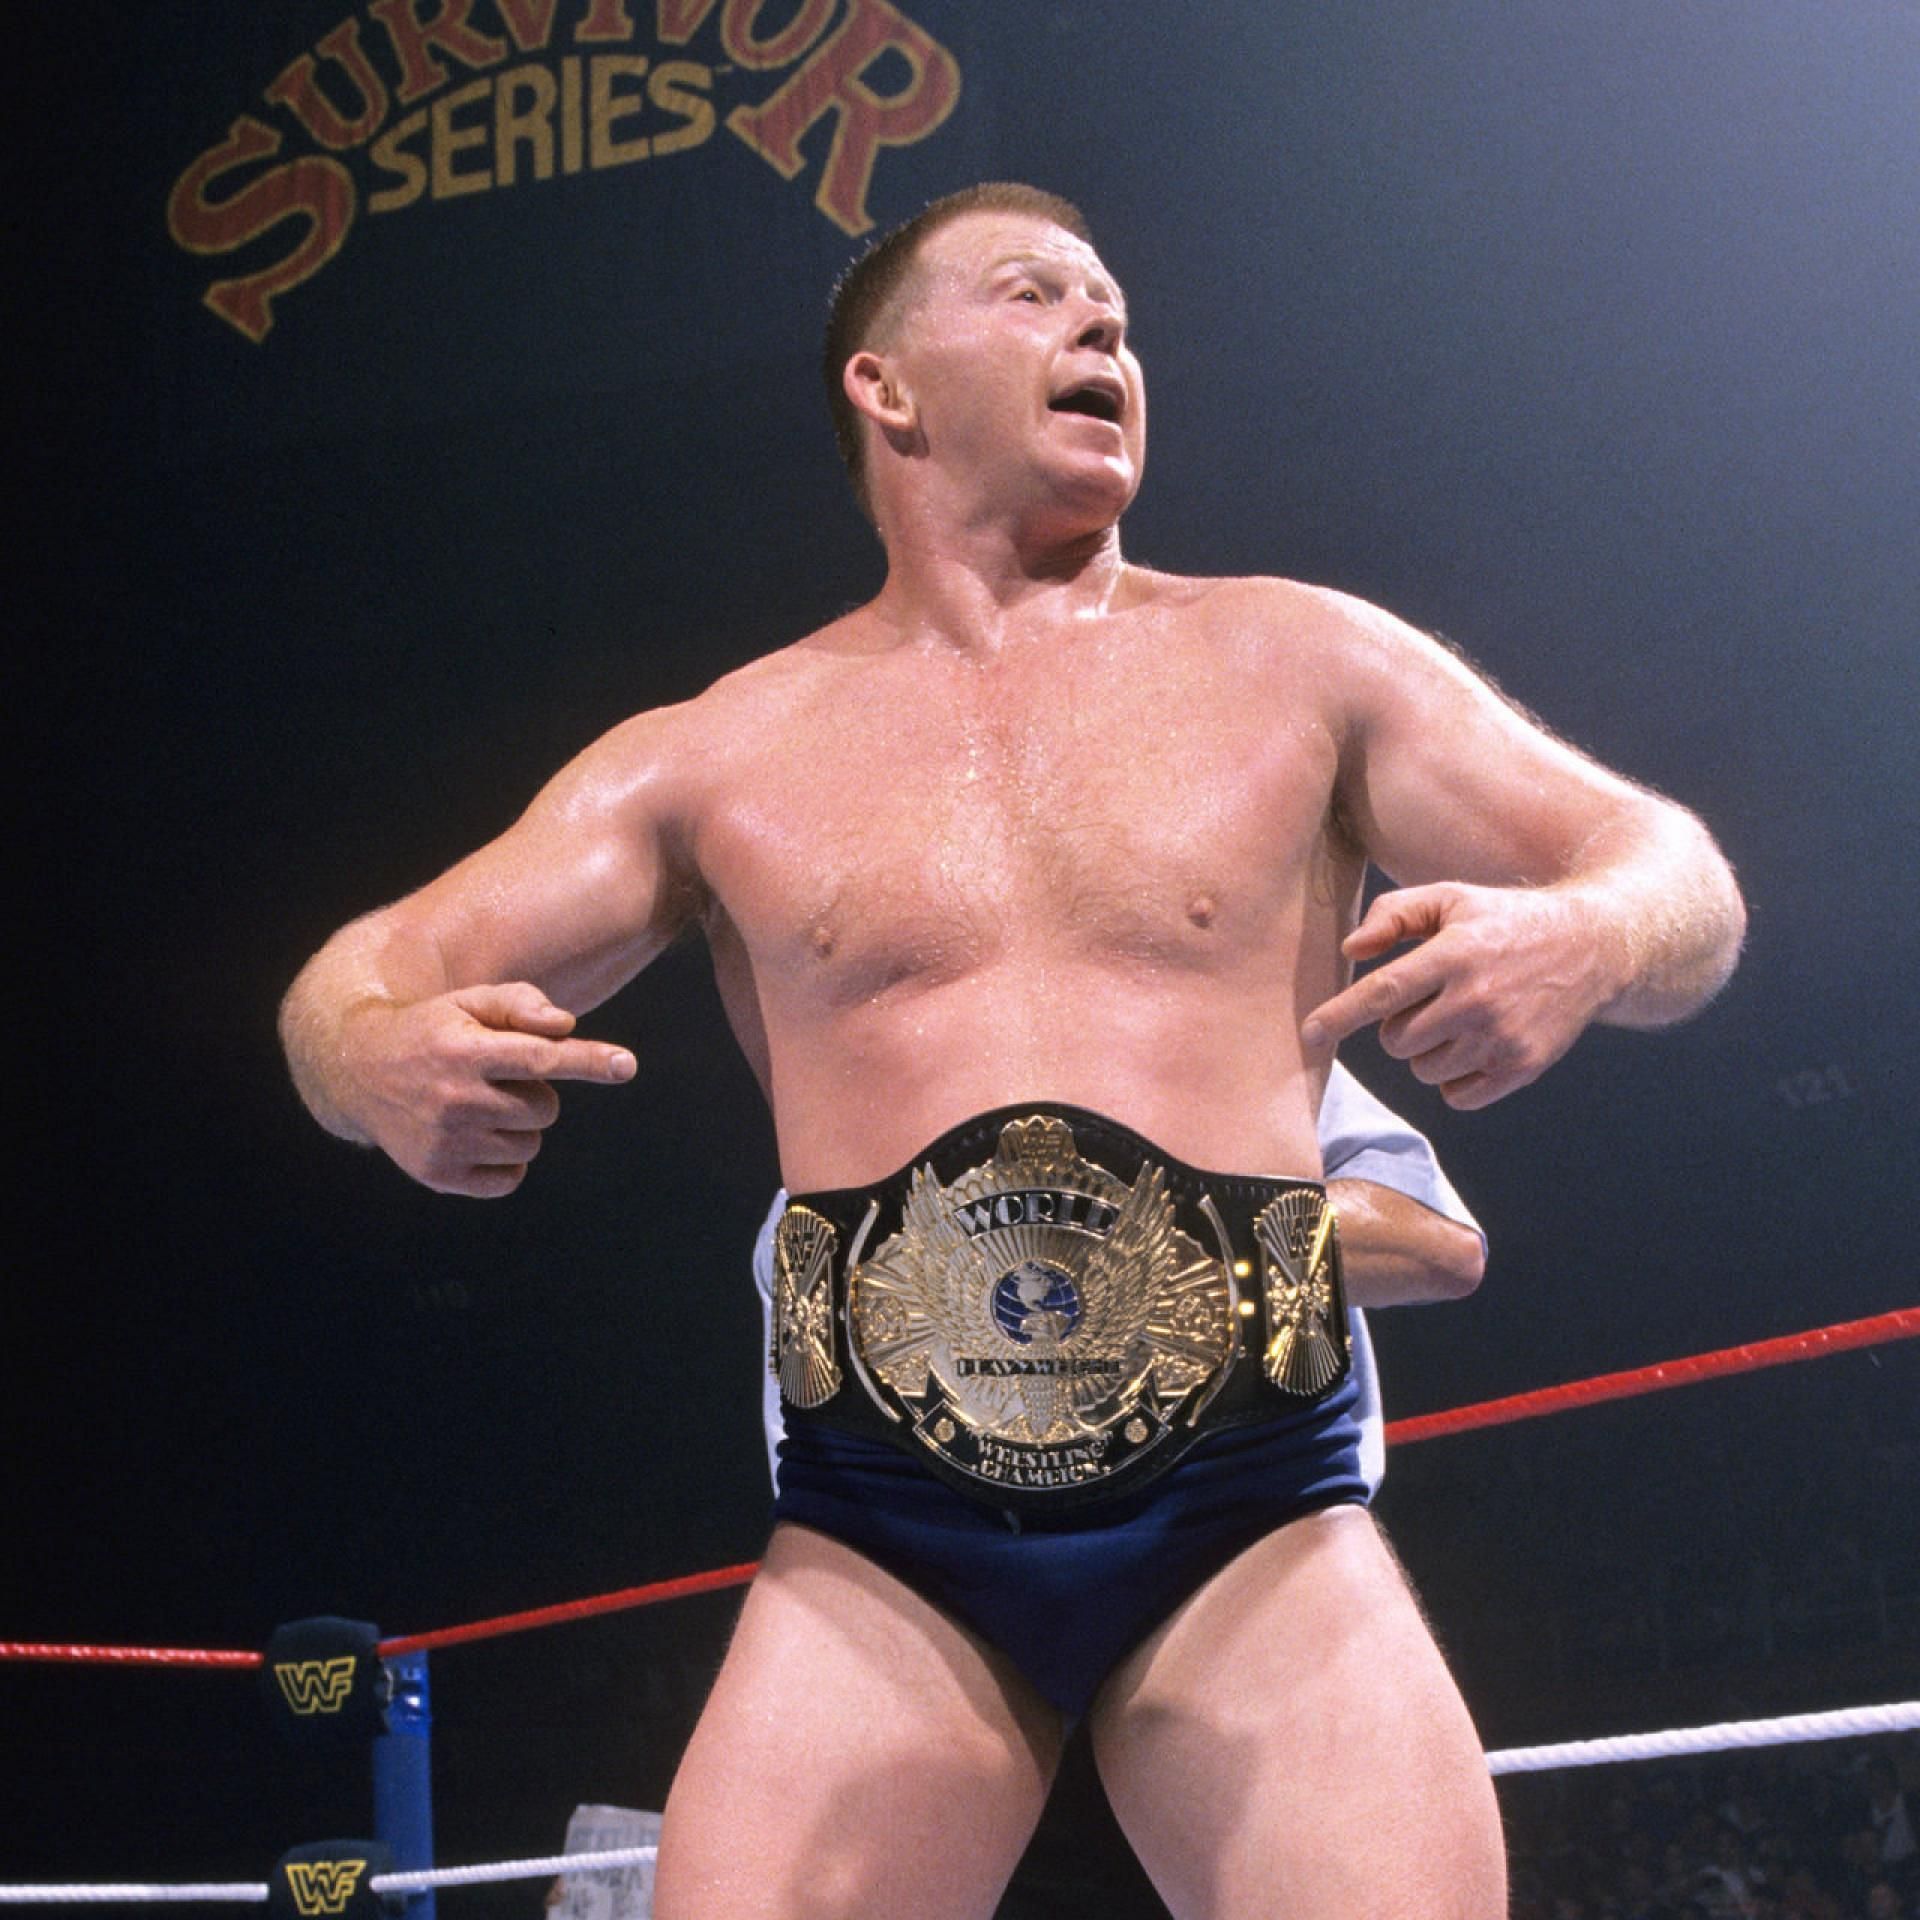 Bob Backlund in his second reign as WWE Champion